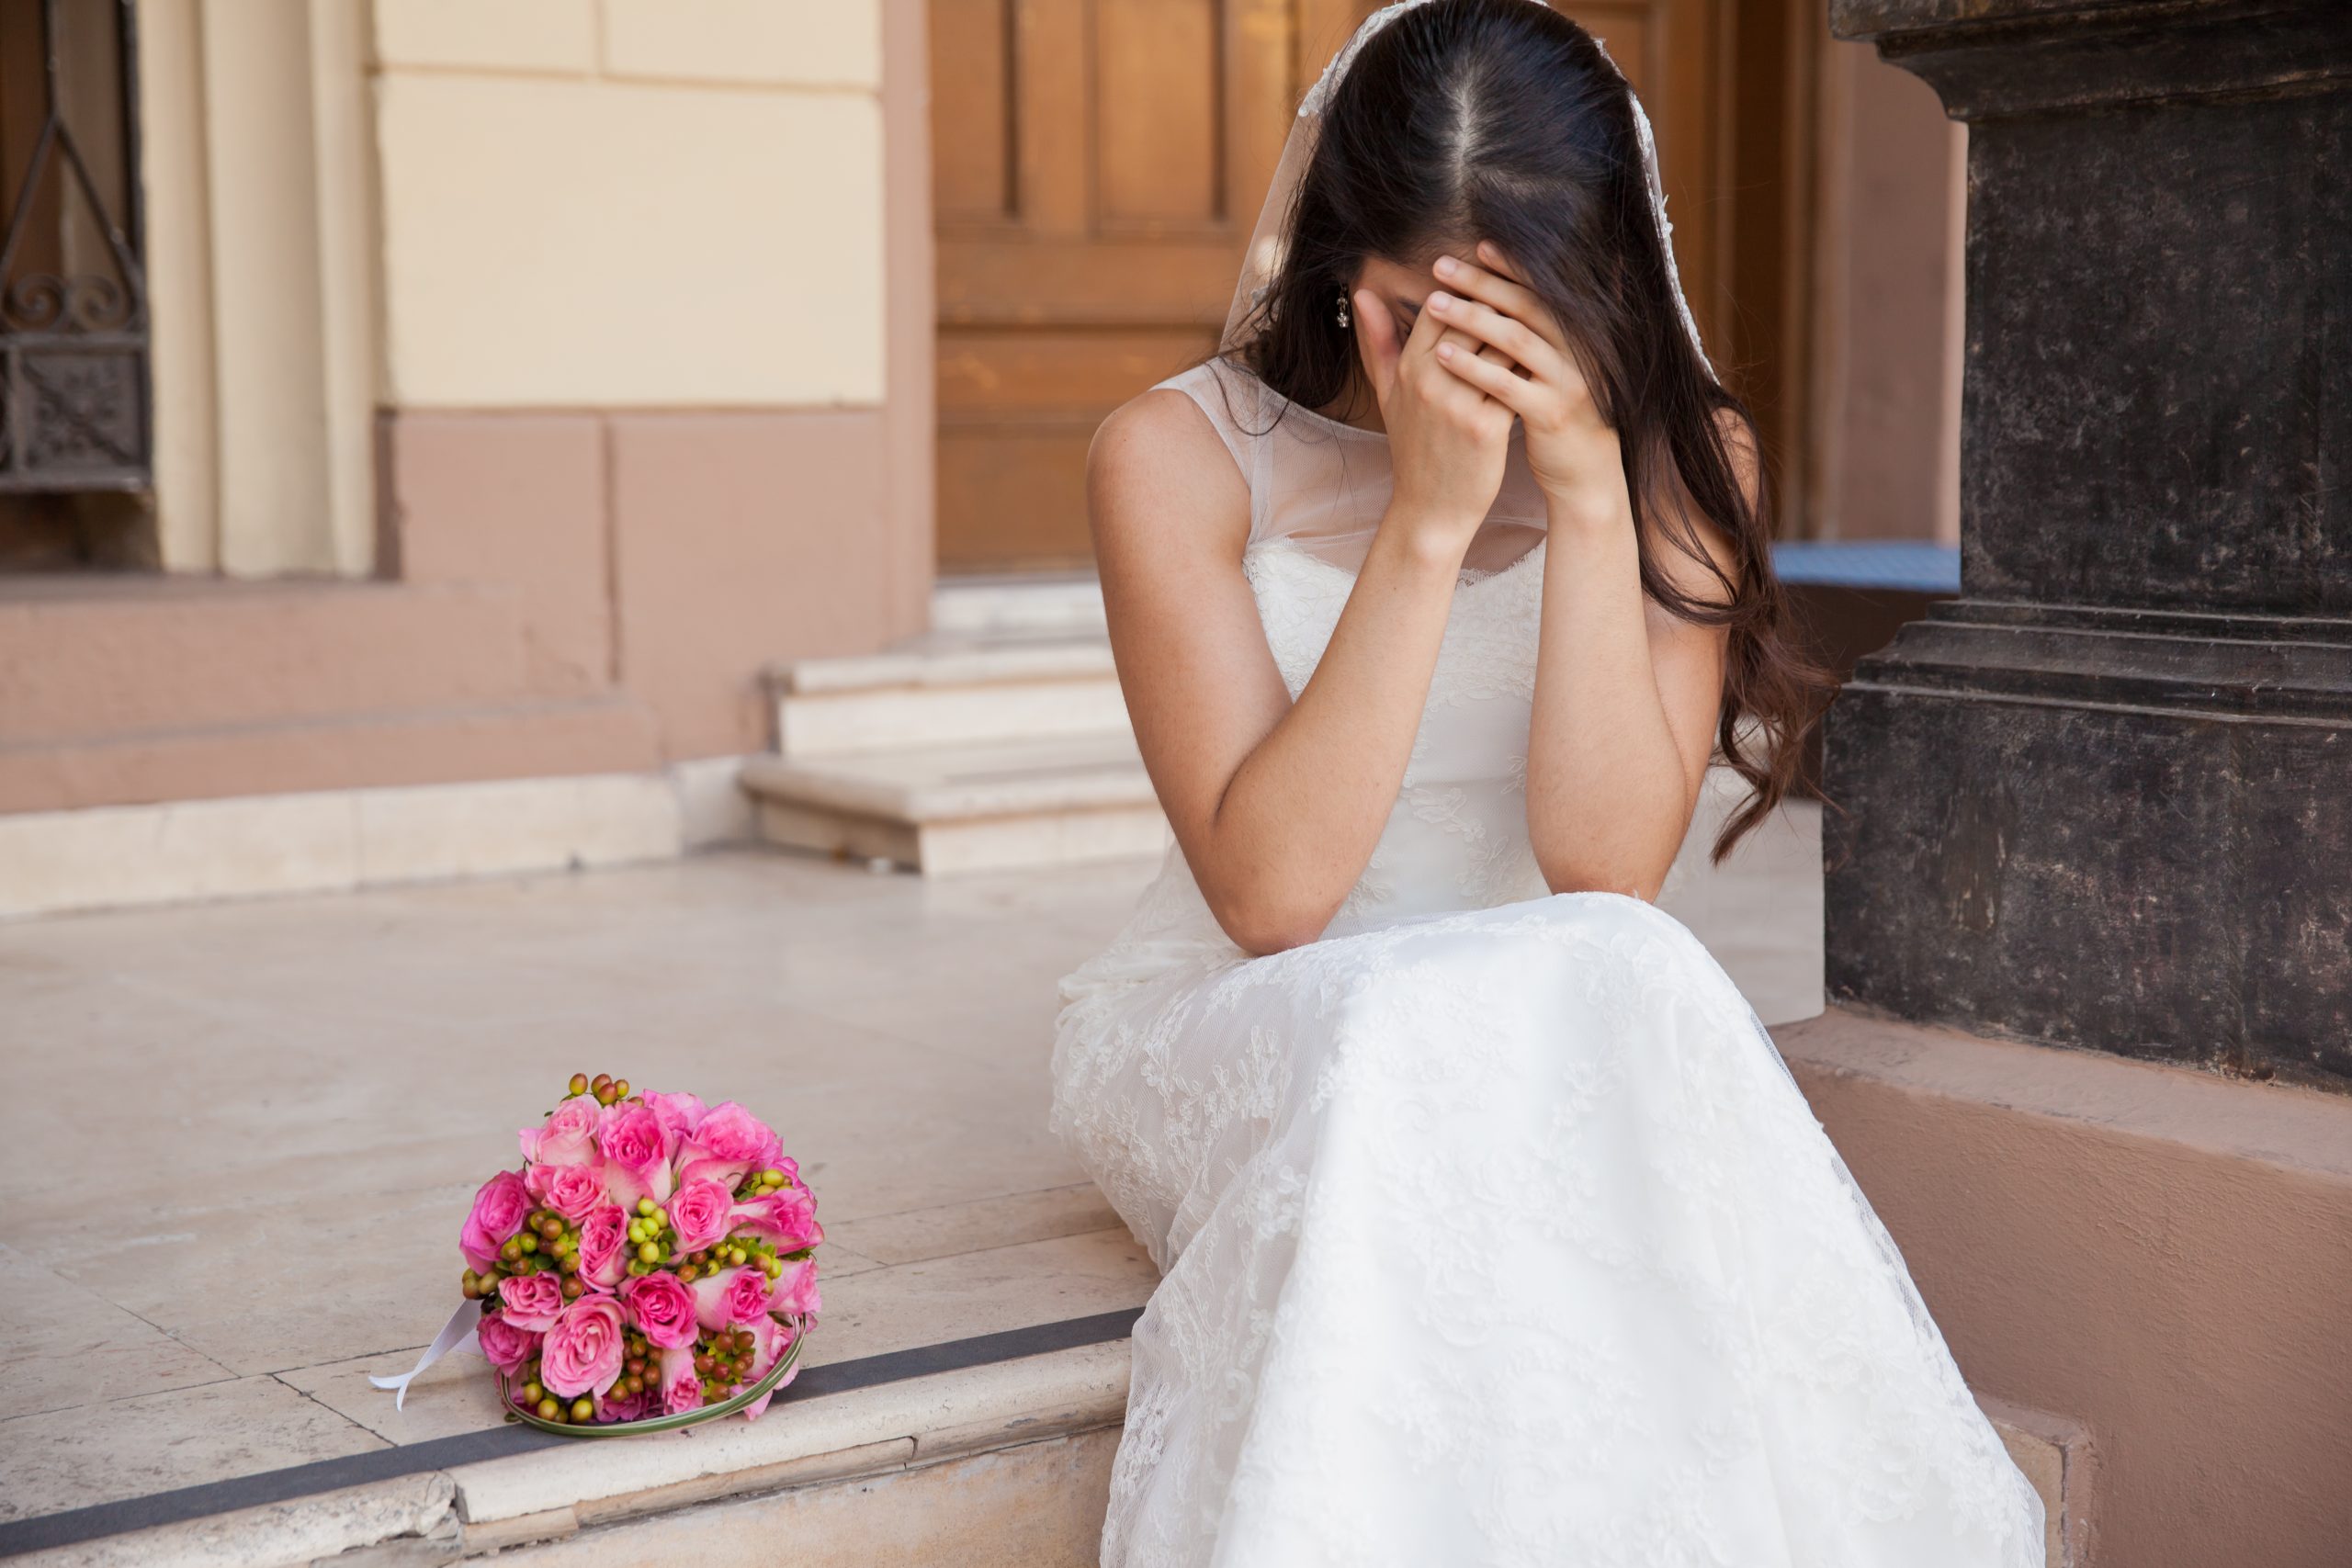 I worked a wedding where the maid of honor shoved her hands down the groom’s pants – her next move was so much worse